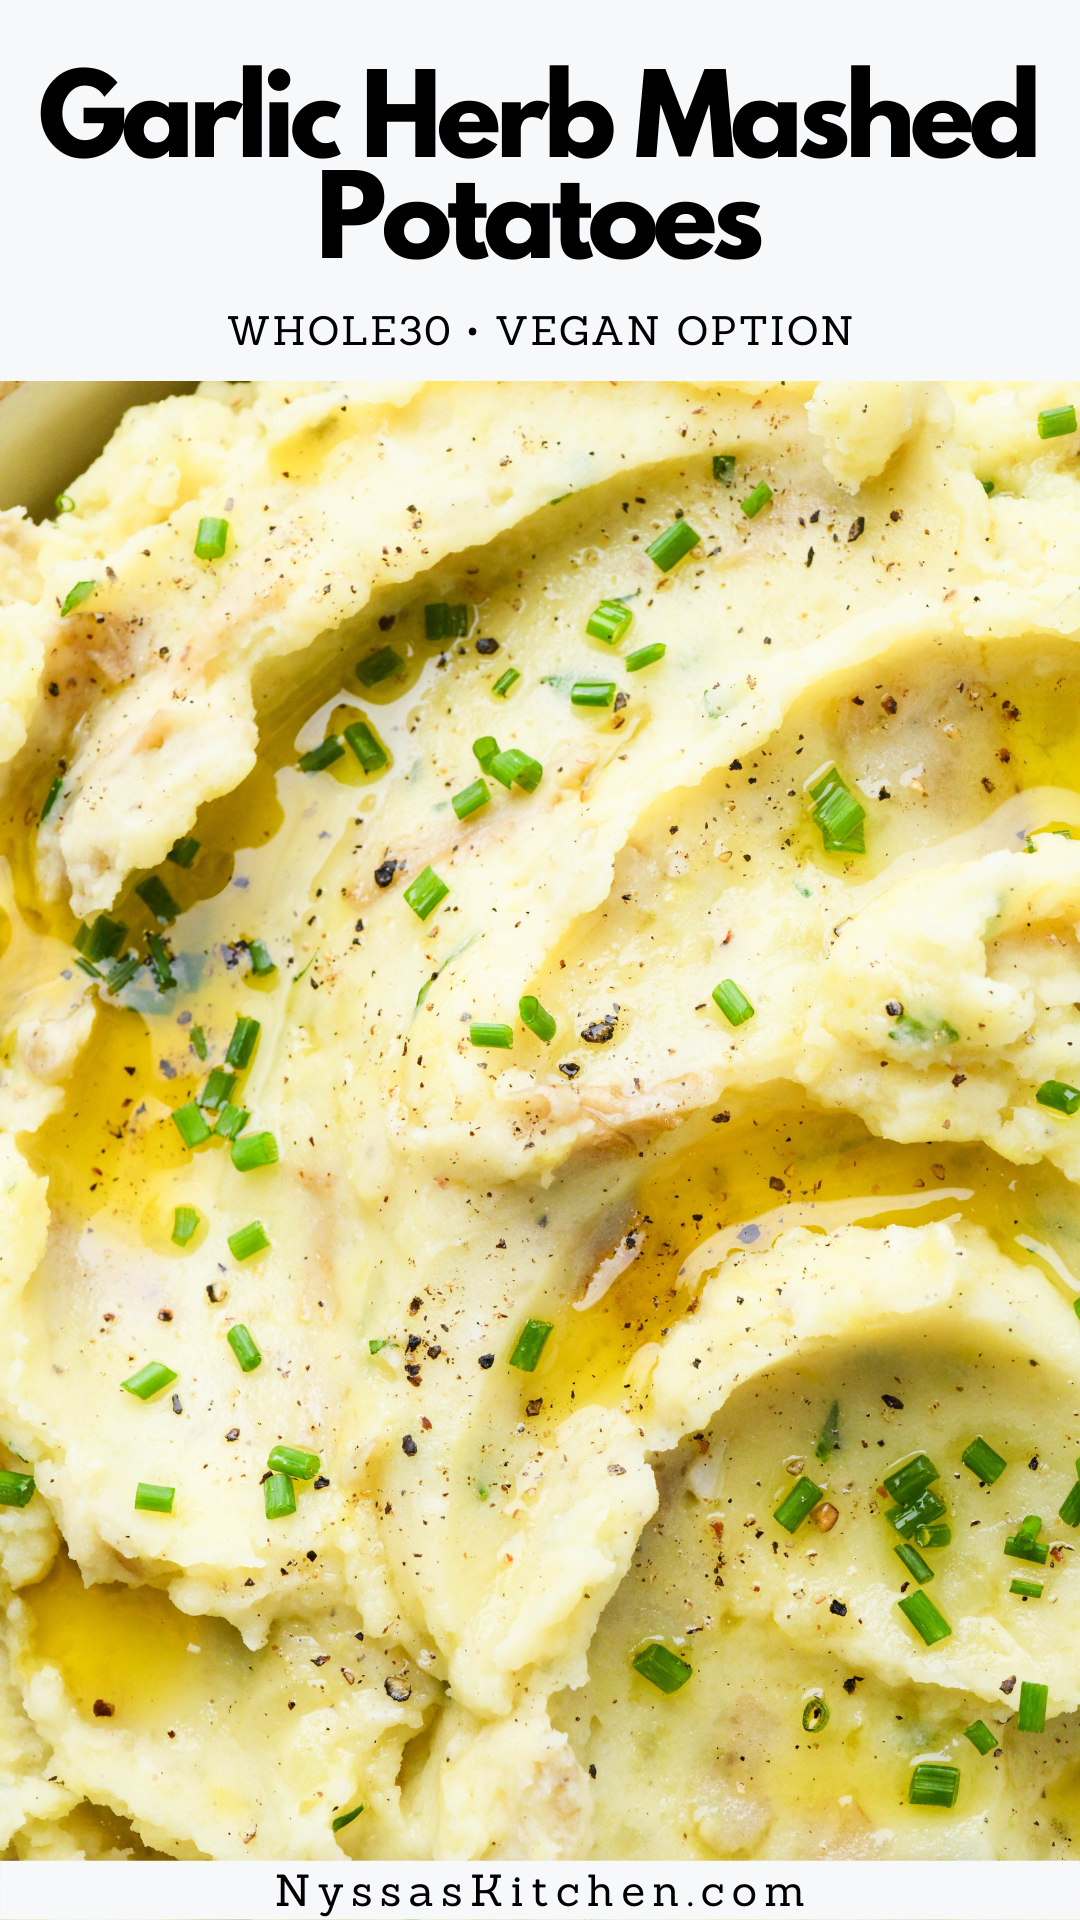 Whole30 garlic herb mashed potatoes are the healthy homemade comfort food side dish you need! Made with buttery Yukon gold potatoes, garlic infused ghee, and a generous handful of fresh herbs. They are savory, creamy, and absolutely irresistible. Whole30, paleo, gluten free, and vegan option.